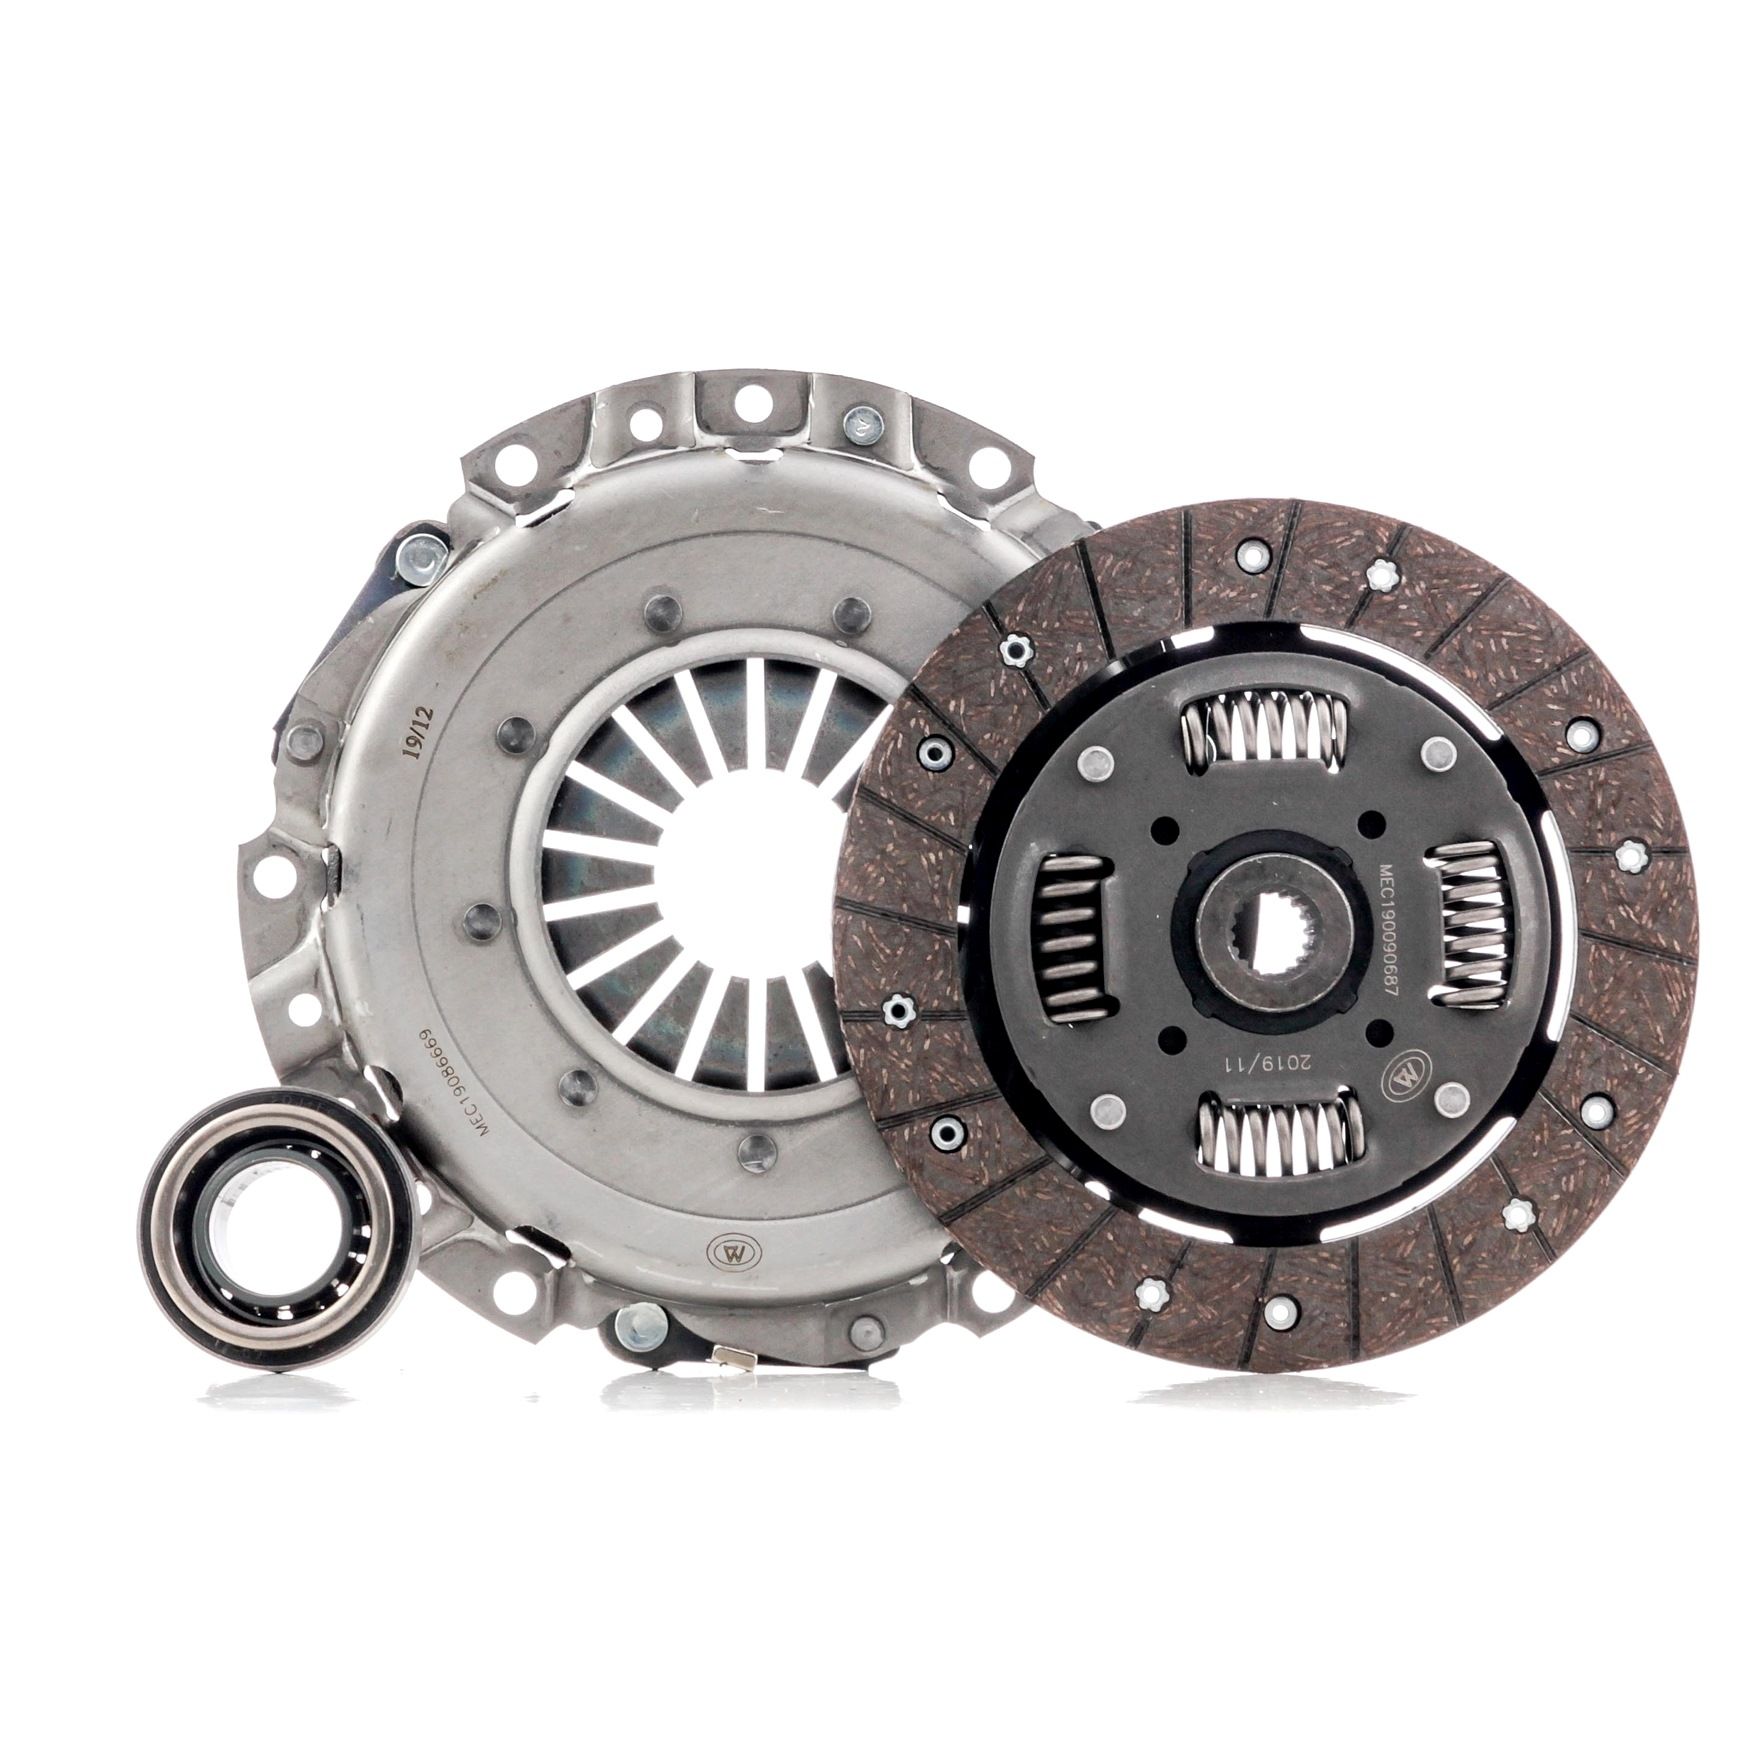 MECARM MK10152 Clutch kit with clutch release bearing, 190mm